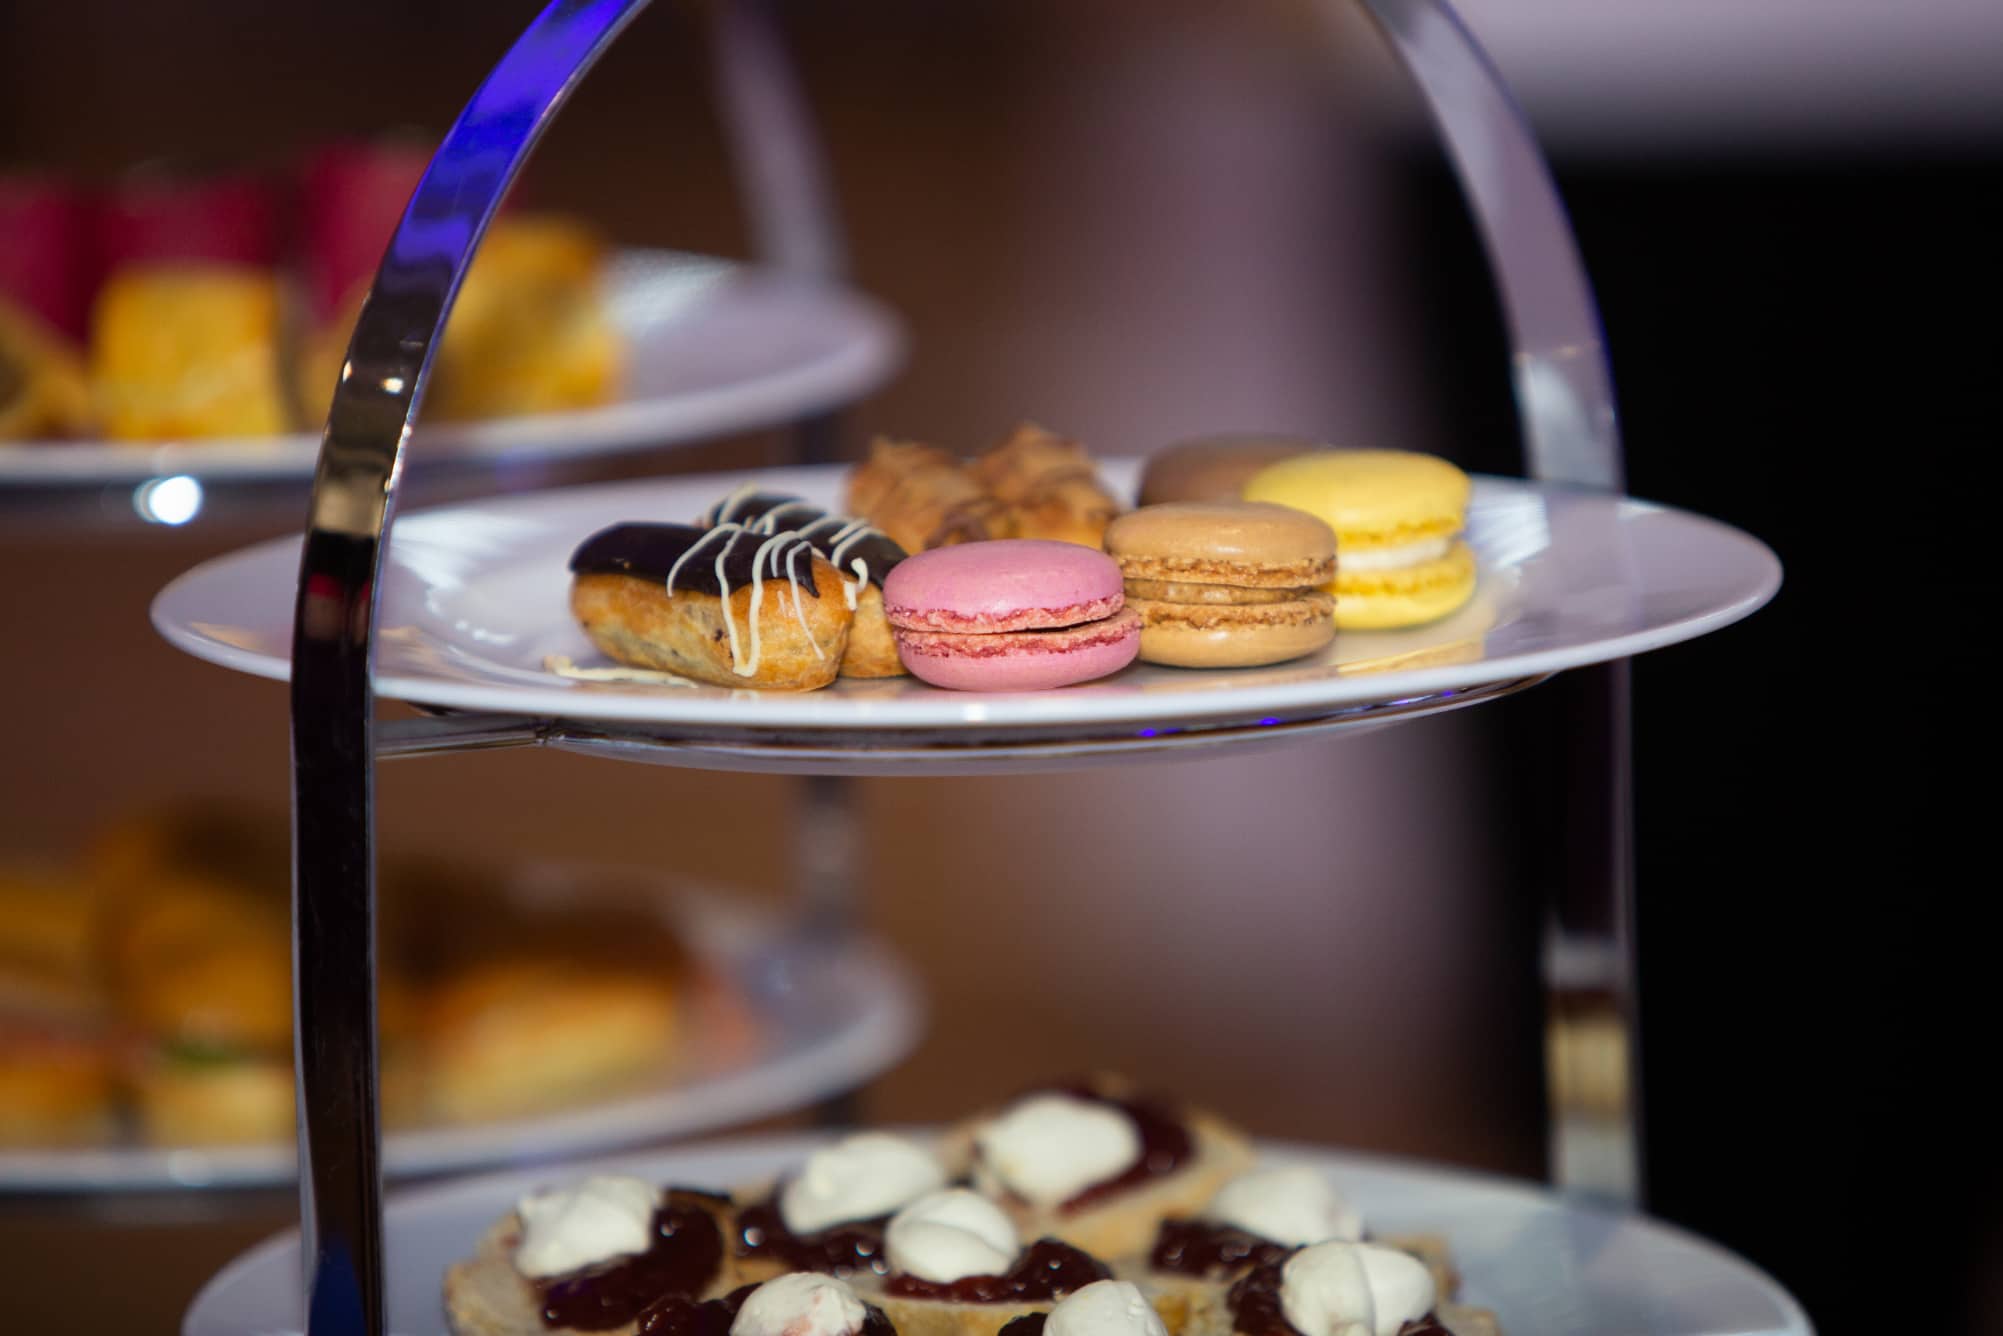 Afternoon tea on stands